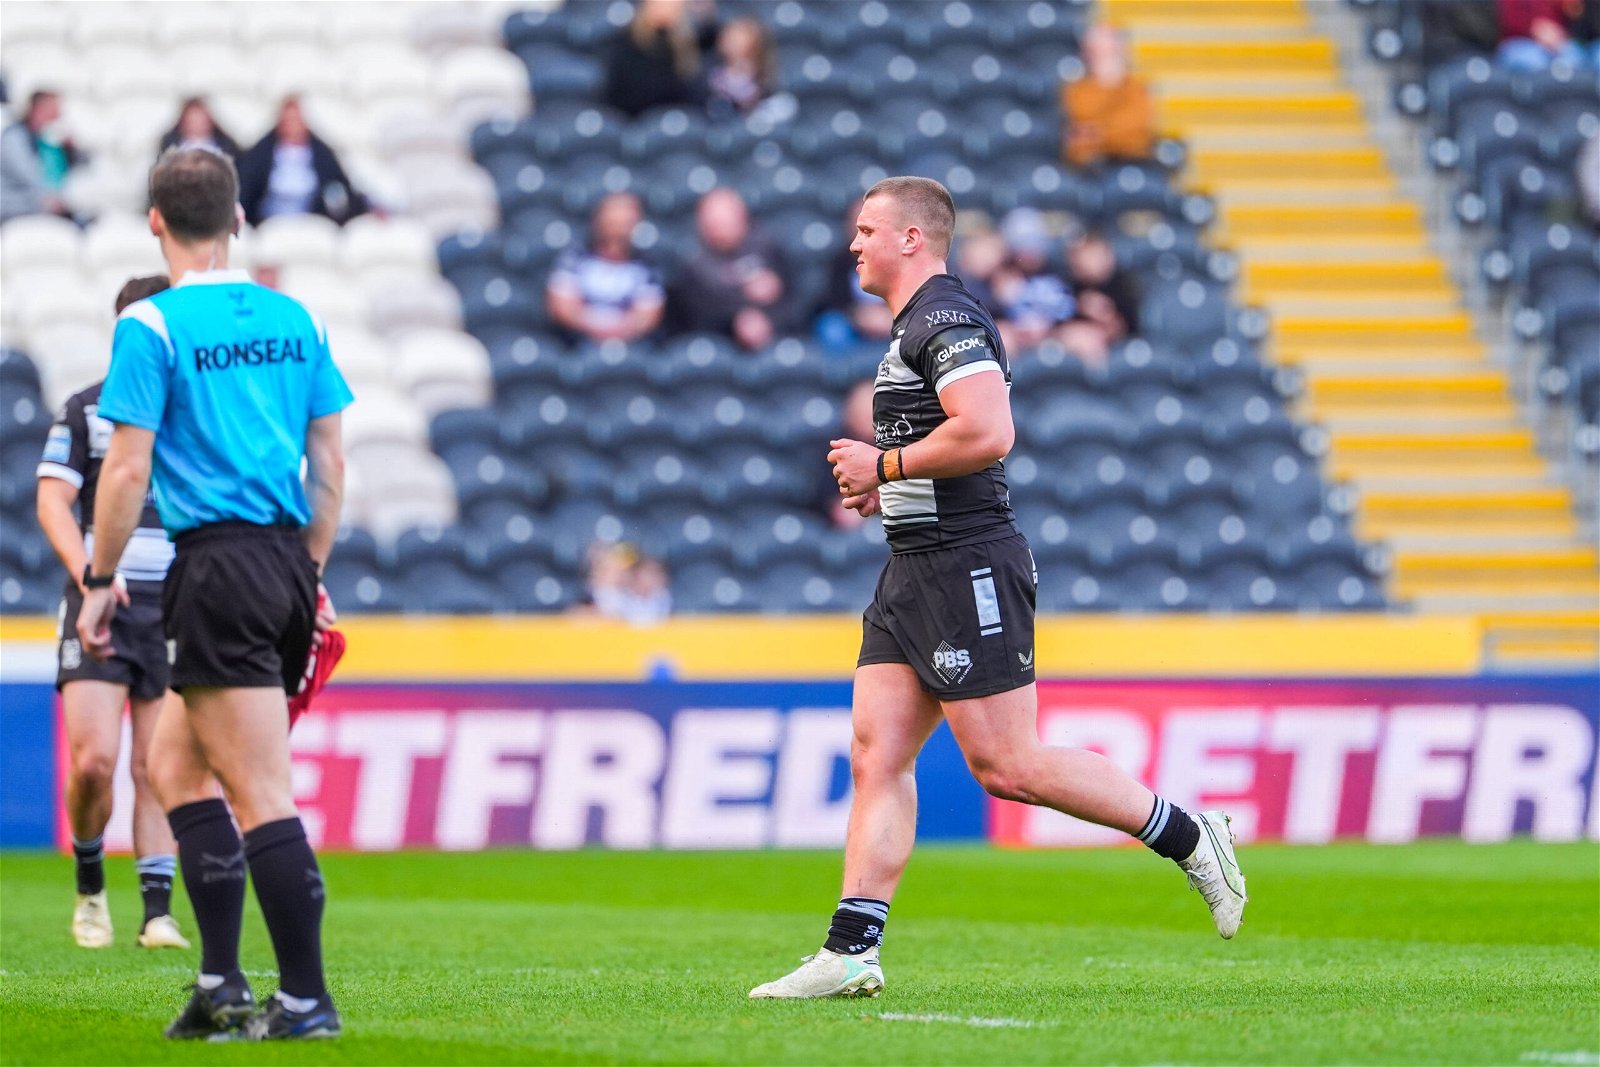 Super League Disciplinary: Hull FC's Jack Brown leaves the field after being yellow carded